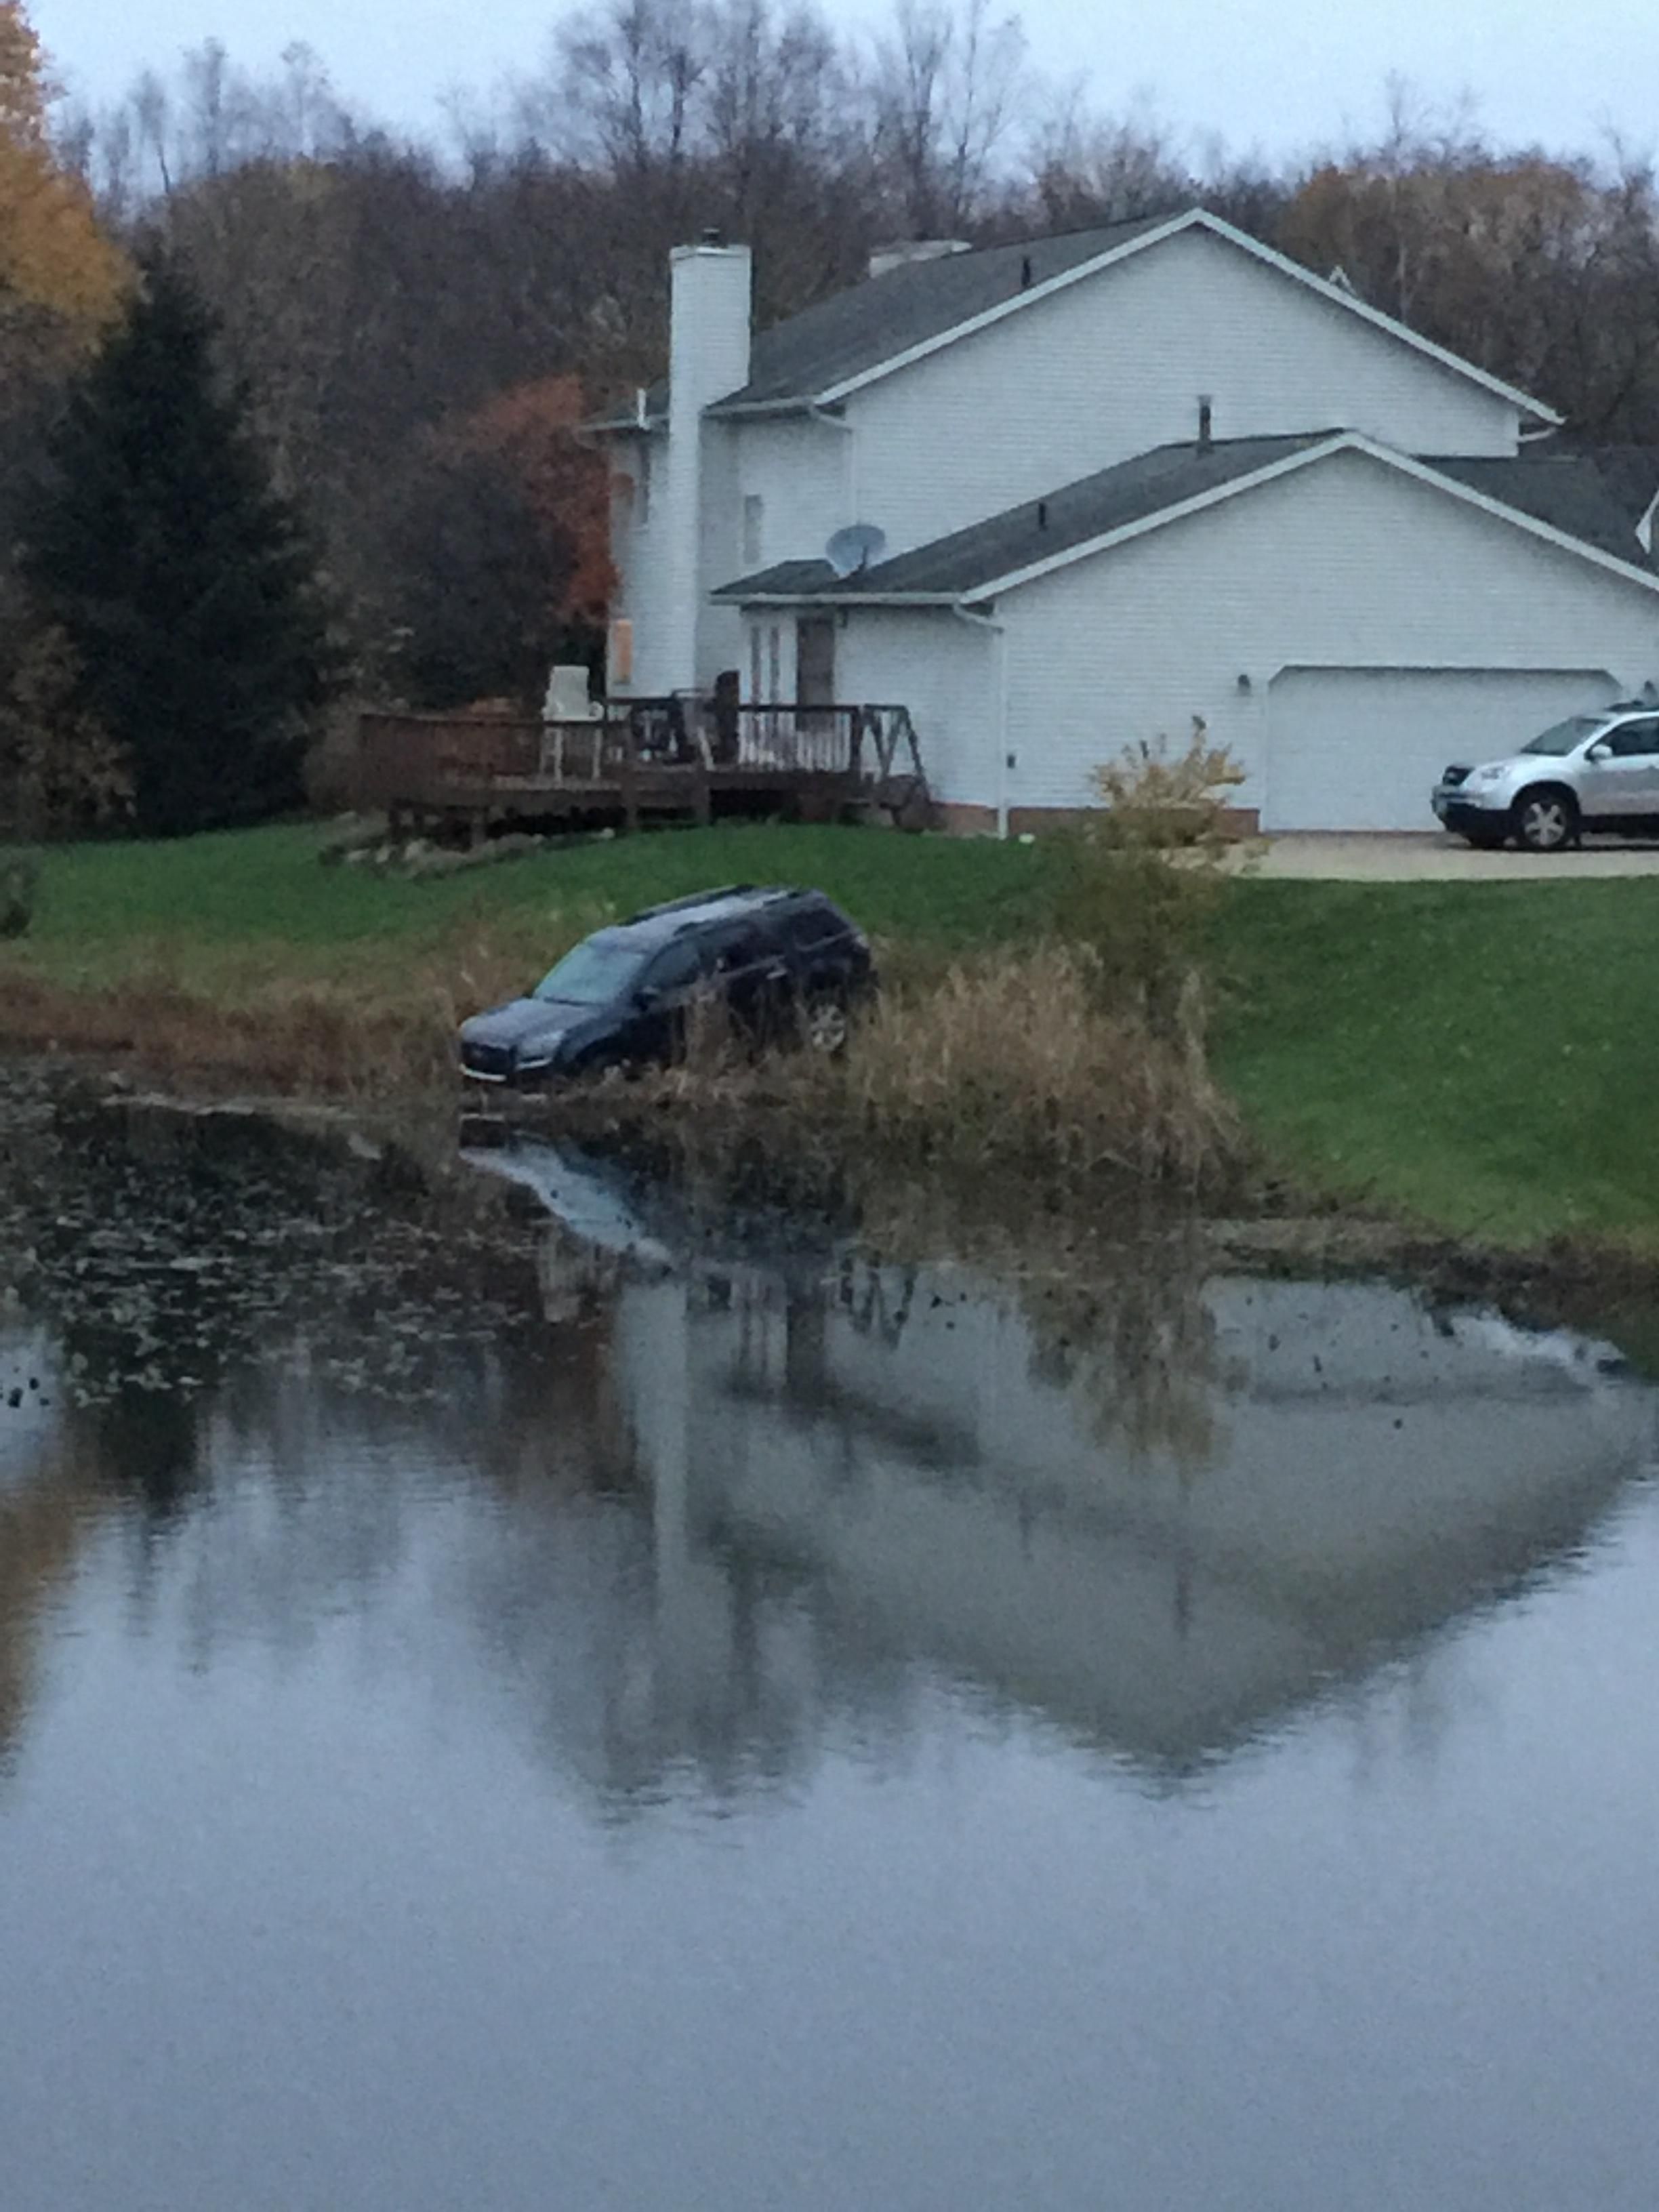 We’re truly witnessing something rare, as the wild SUV takes a drink out of the pond. It has traveled many miles to quench its thirst.